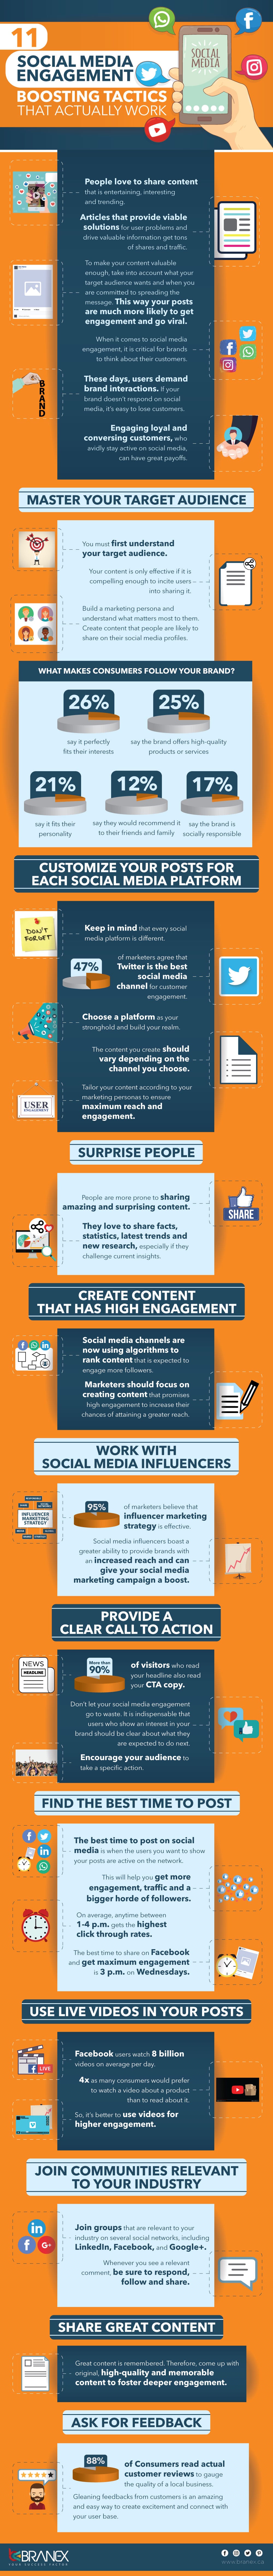 Social Media Engagement: What it is and How to Improve it